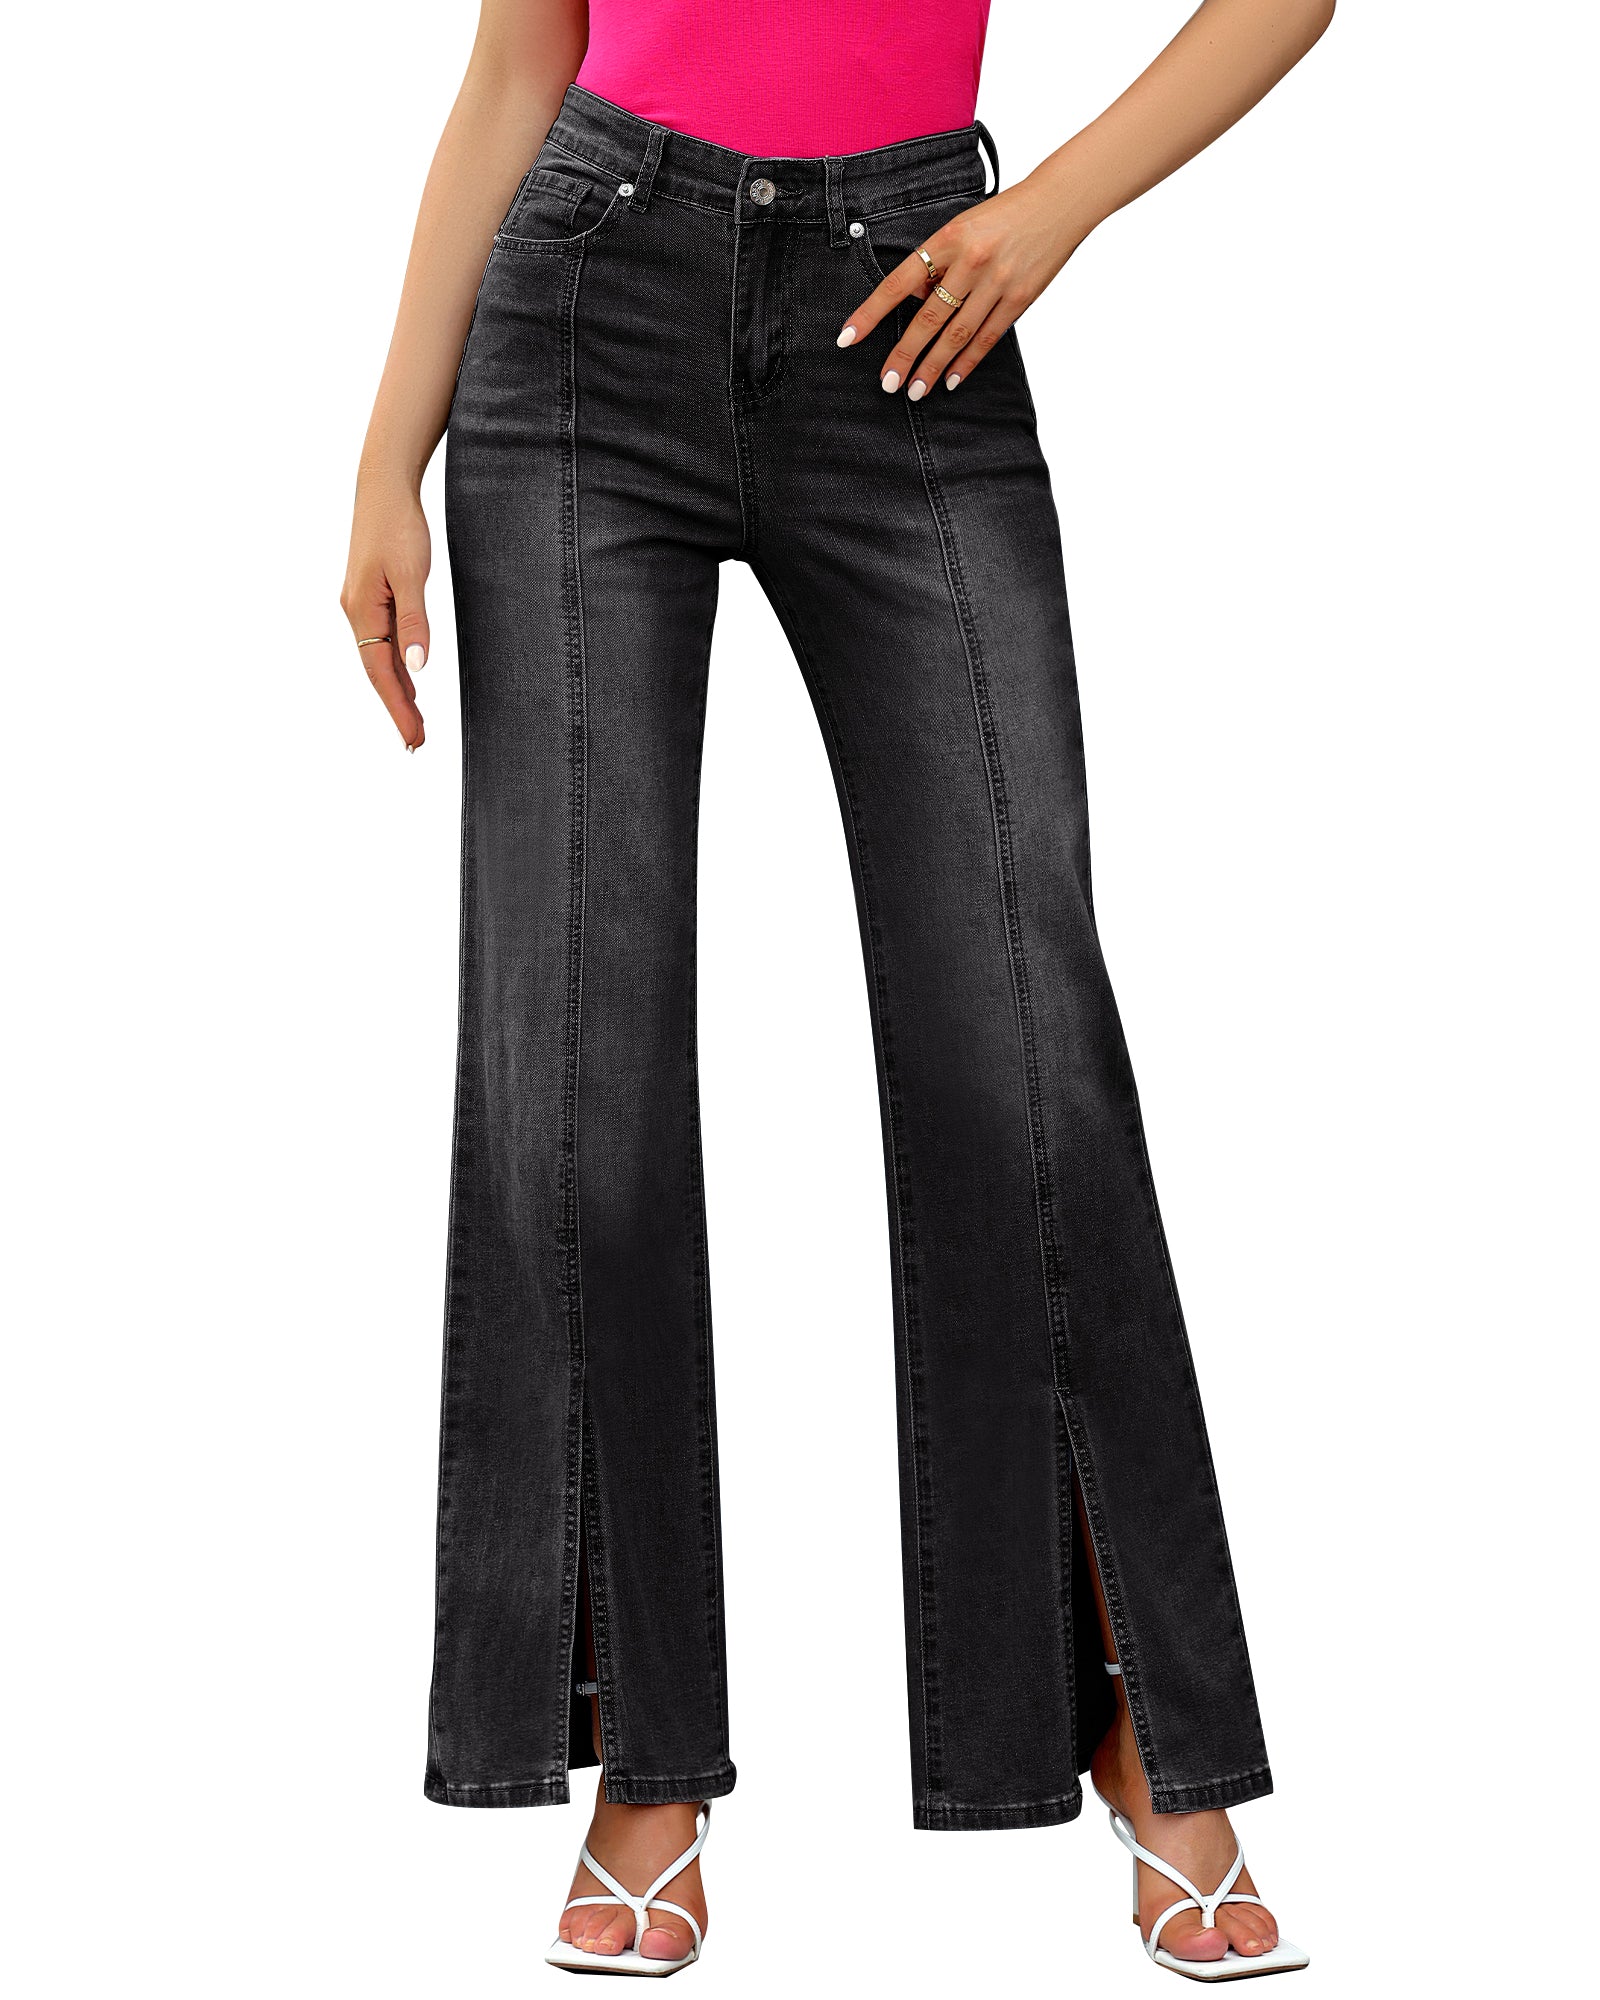 GRAPENT Womens Flare Jeans High Waisted Wide Leg Baggy Jean for